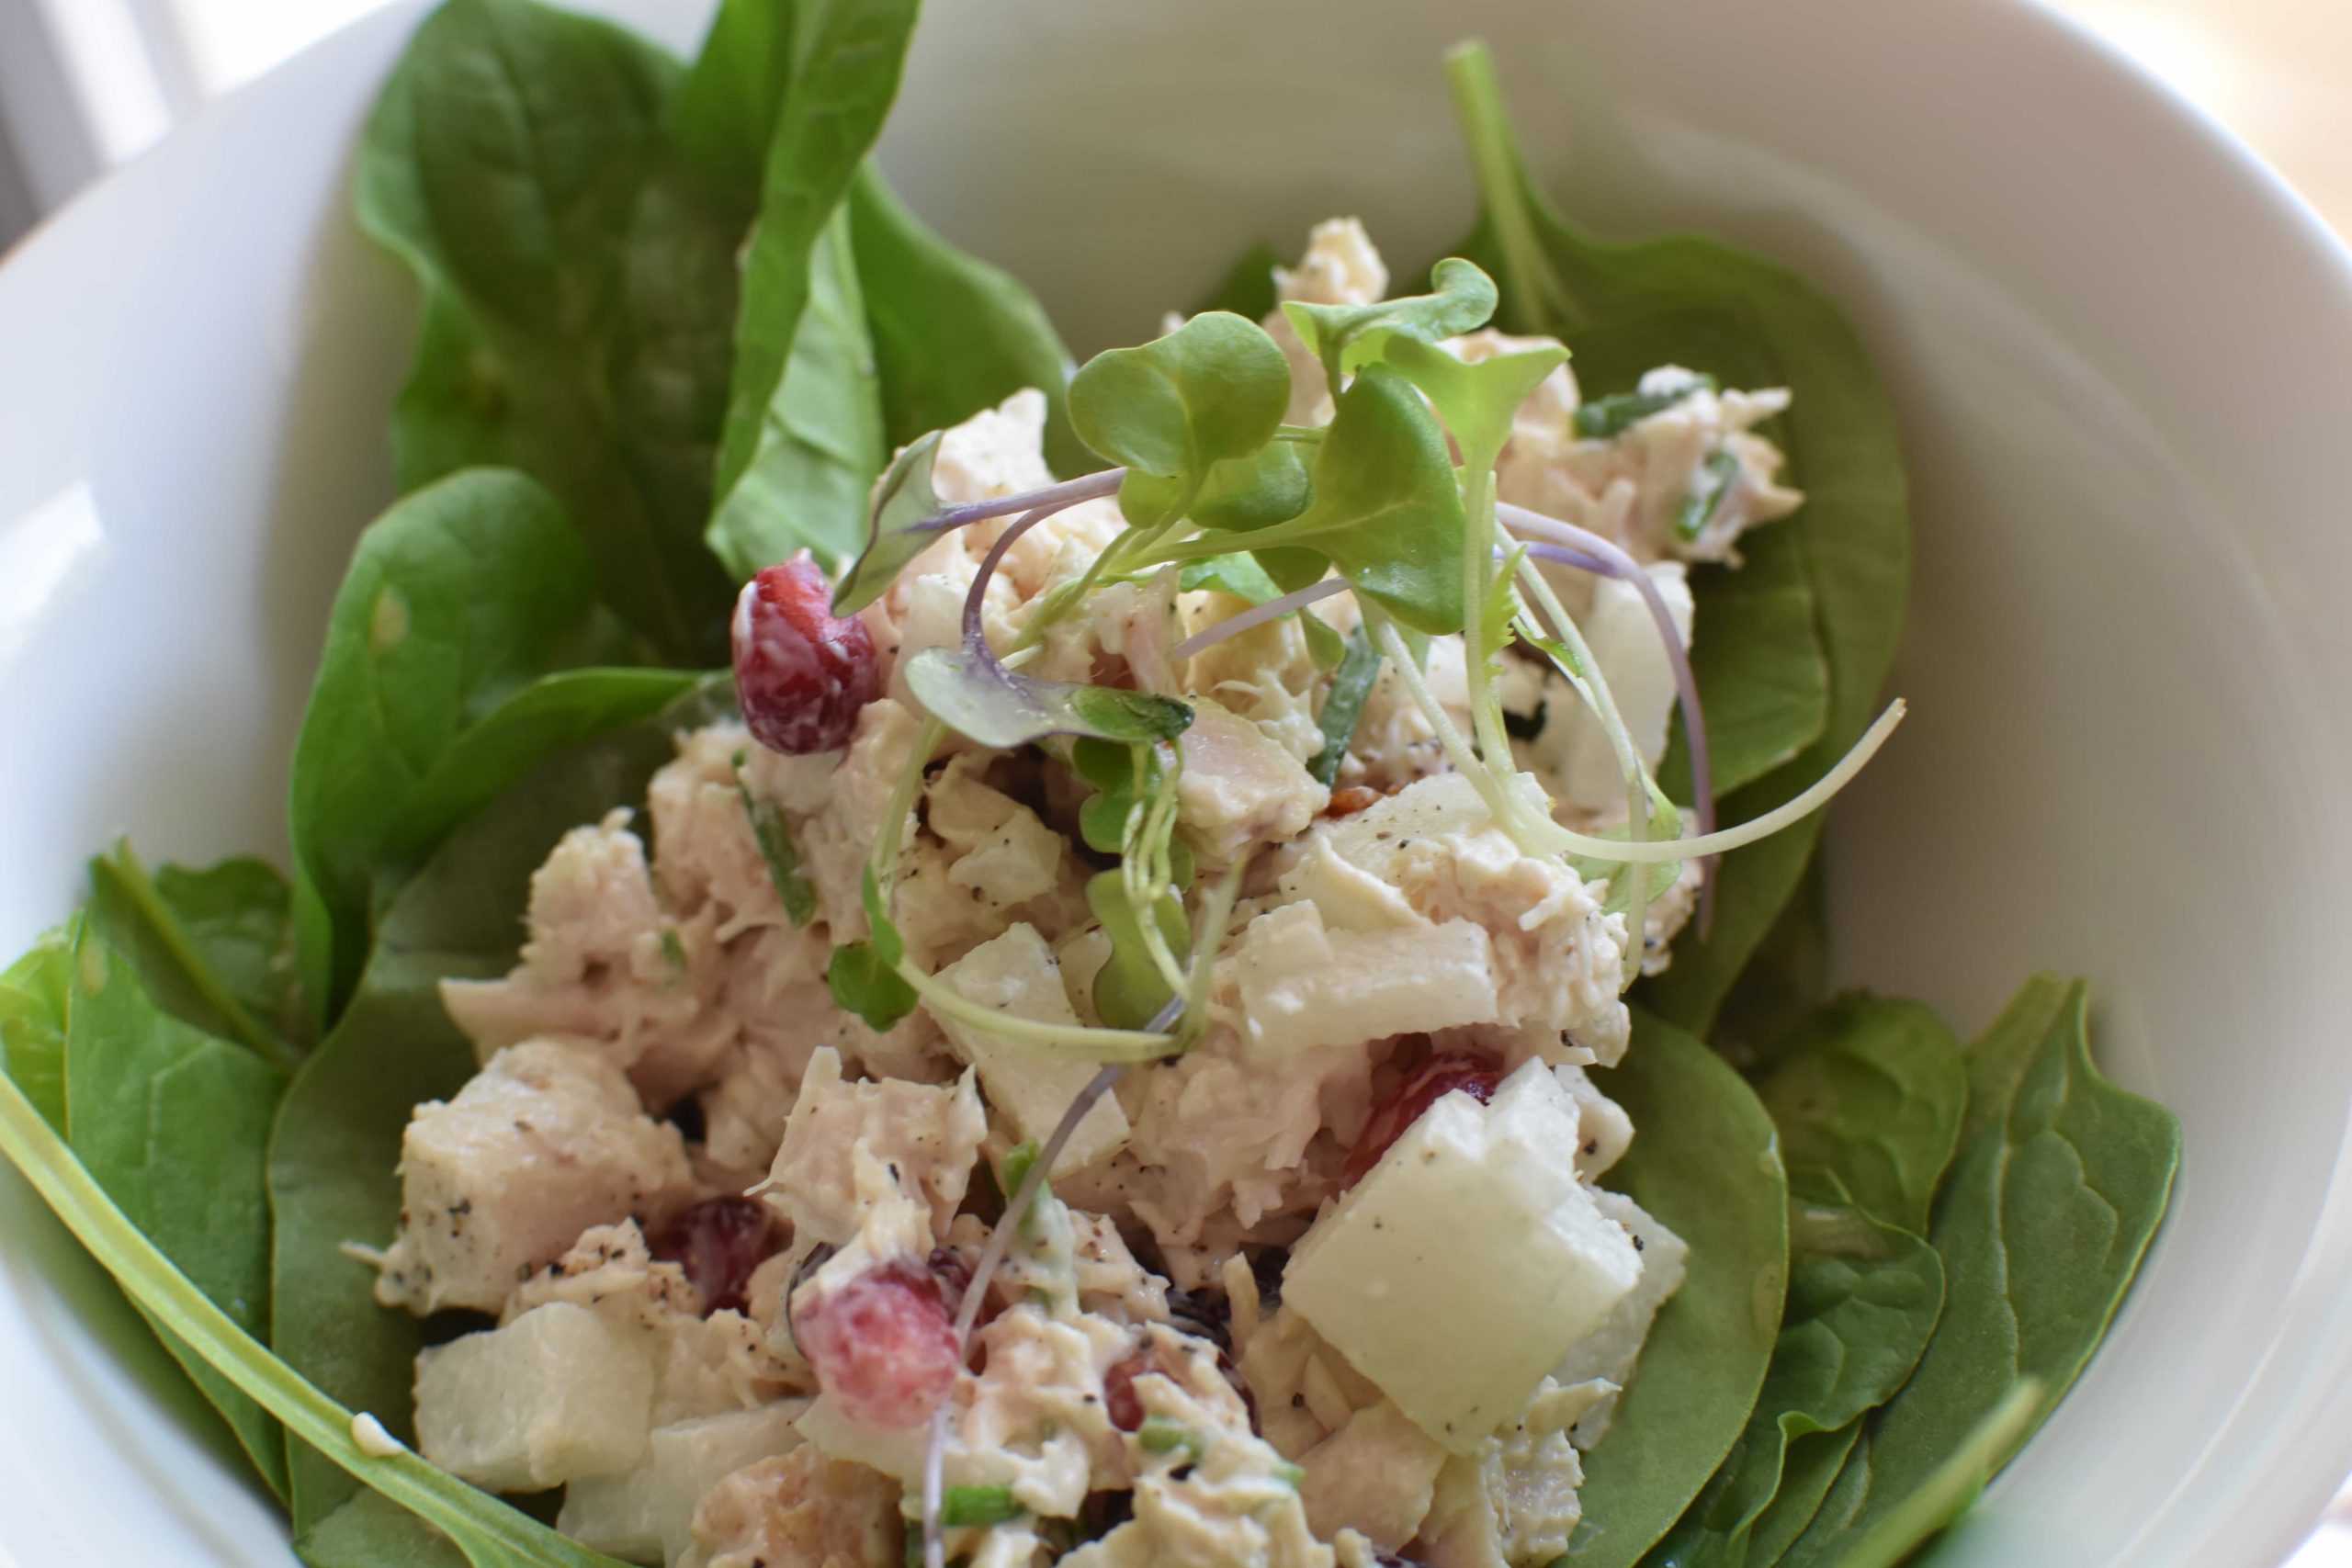 A pomegranate chicken salad on a bed of greens